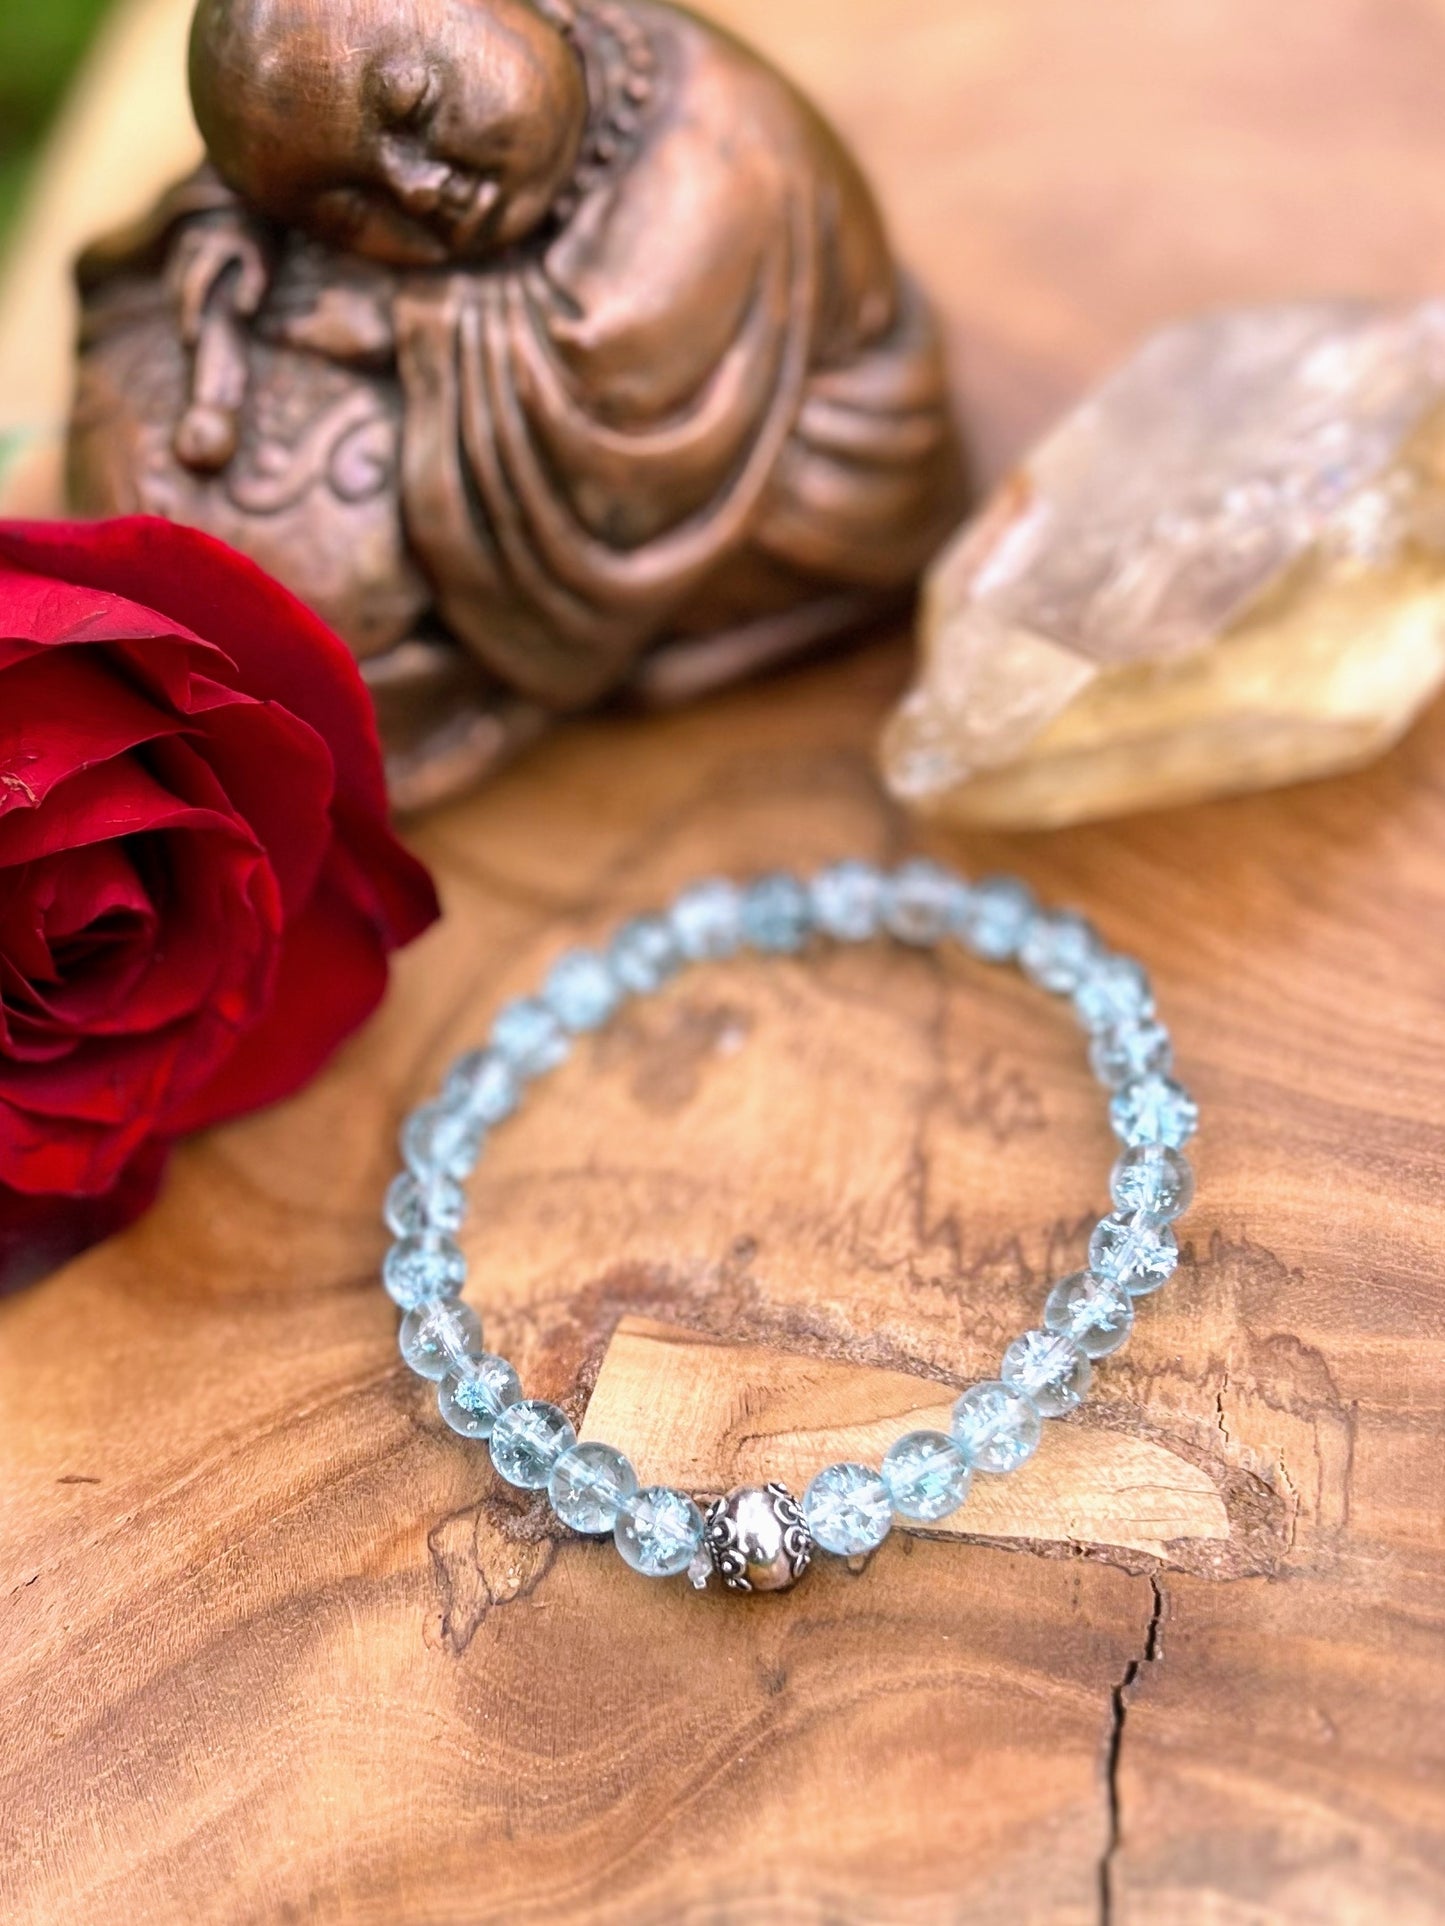 Blue Topaz Bracelet with a Sterling Silver Accent Bead